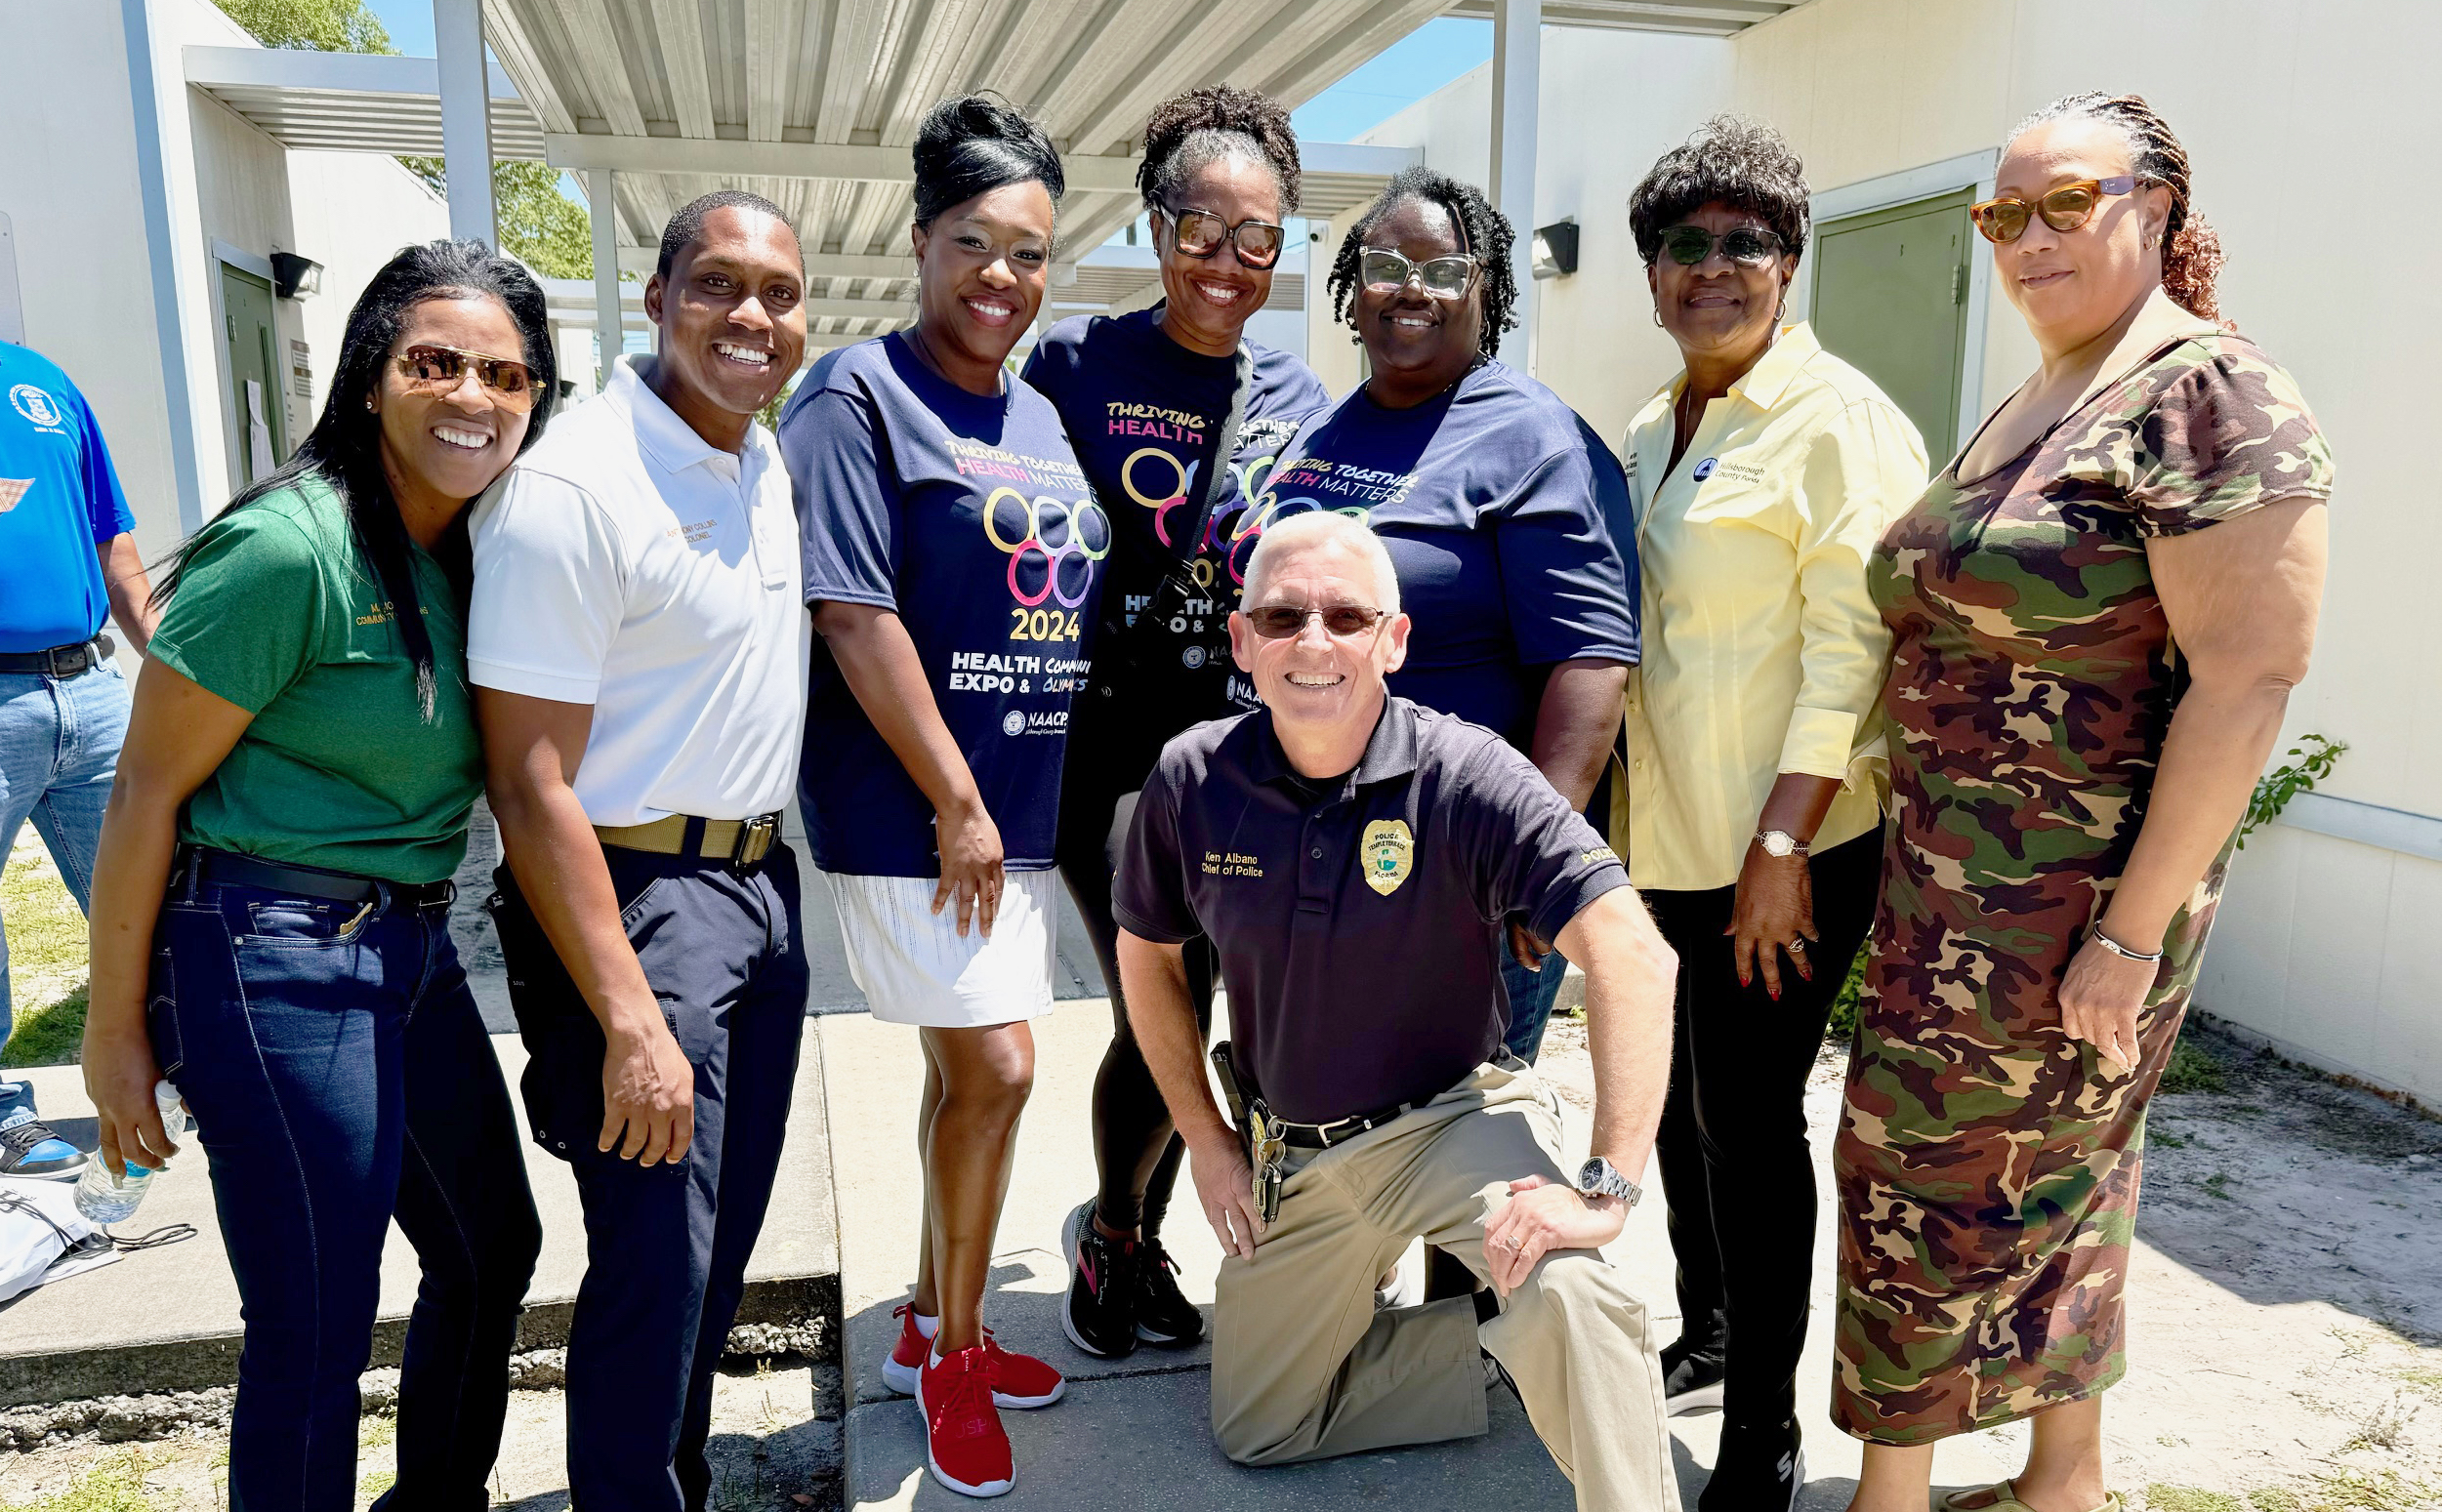 NAACP HILLSBOROUGH COUNTY BRANCH HOLDS INAUGURAL HEALTH EXPO AND COMMUNITY OLYMPICS